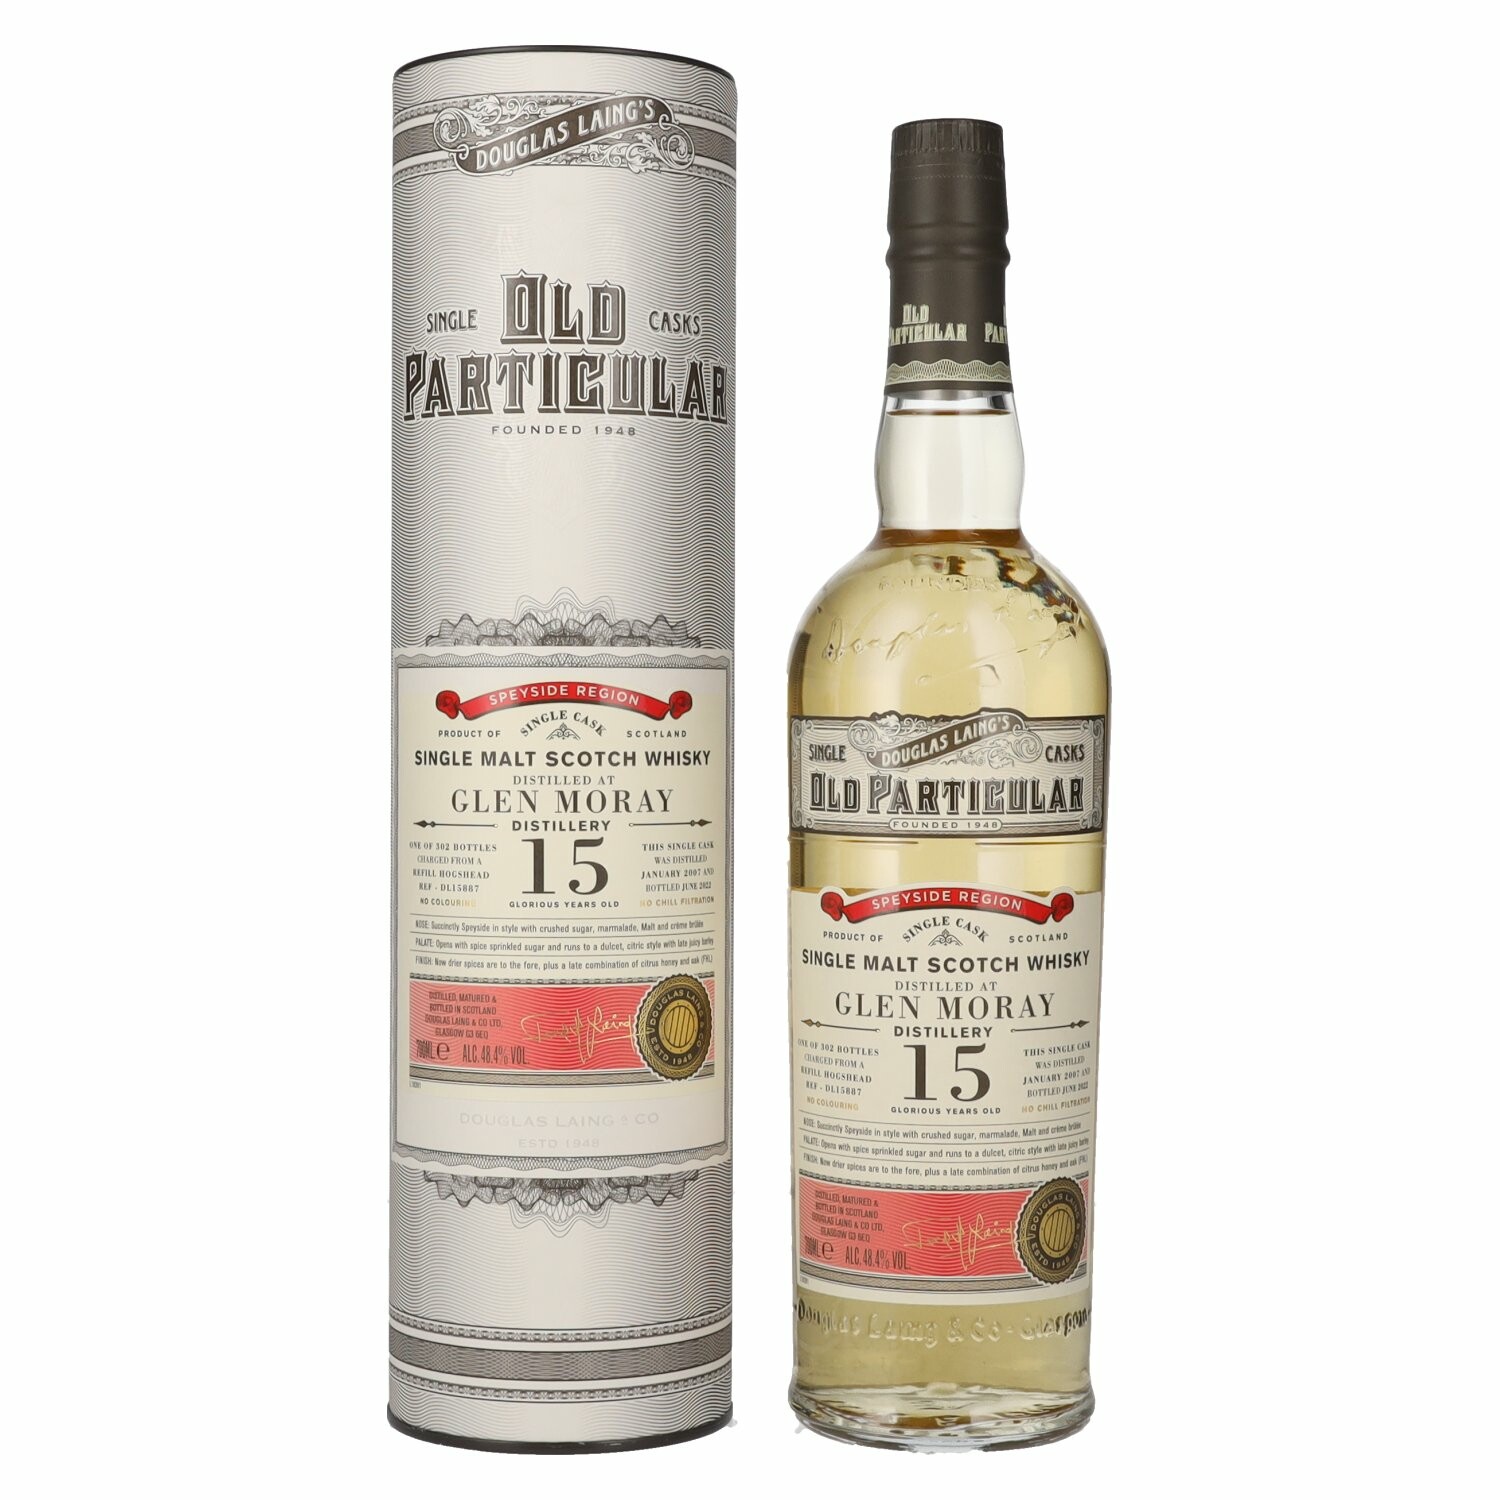 Douglas Laing OLD PARTICULAR Glen Moray 15 Years Old Single Cask Malt 2007 48,4% Vol. 0,7l in Giftbox